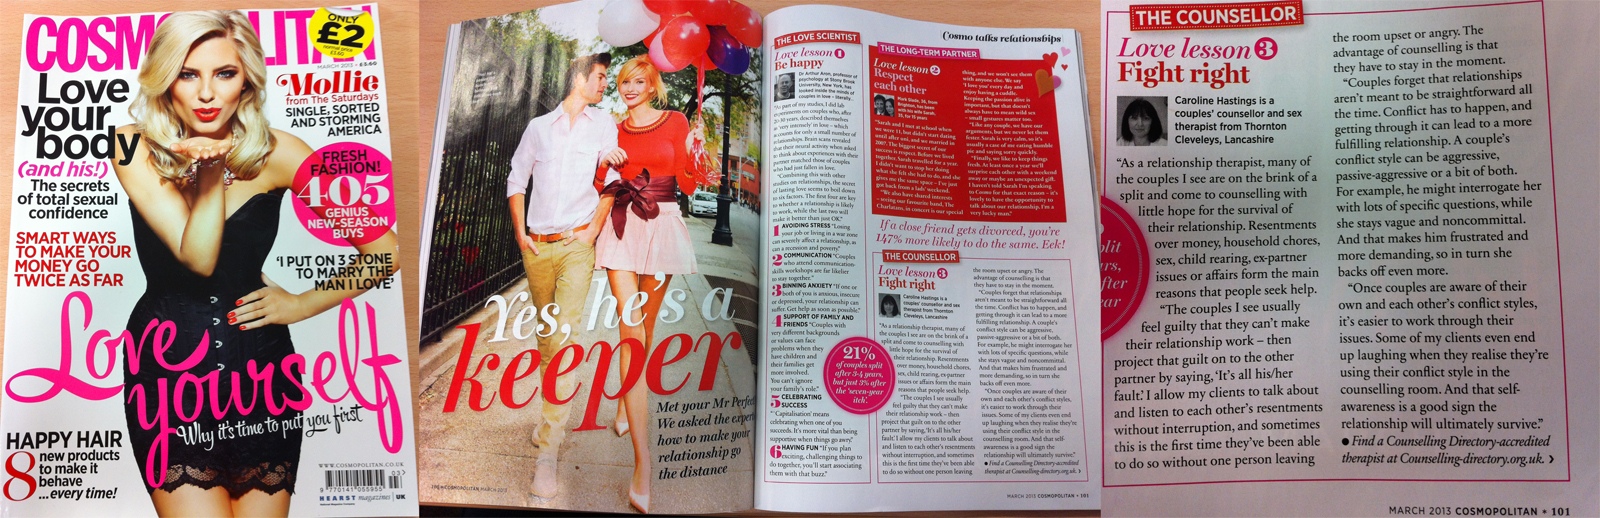 Counselling Directory featured in Cosmopolitan magazine